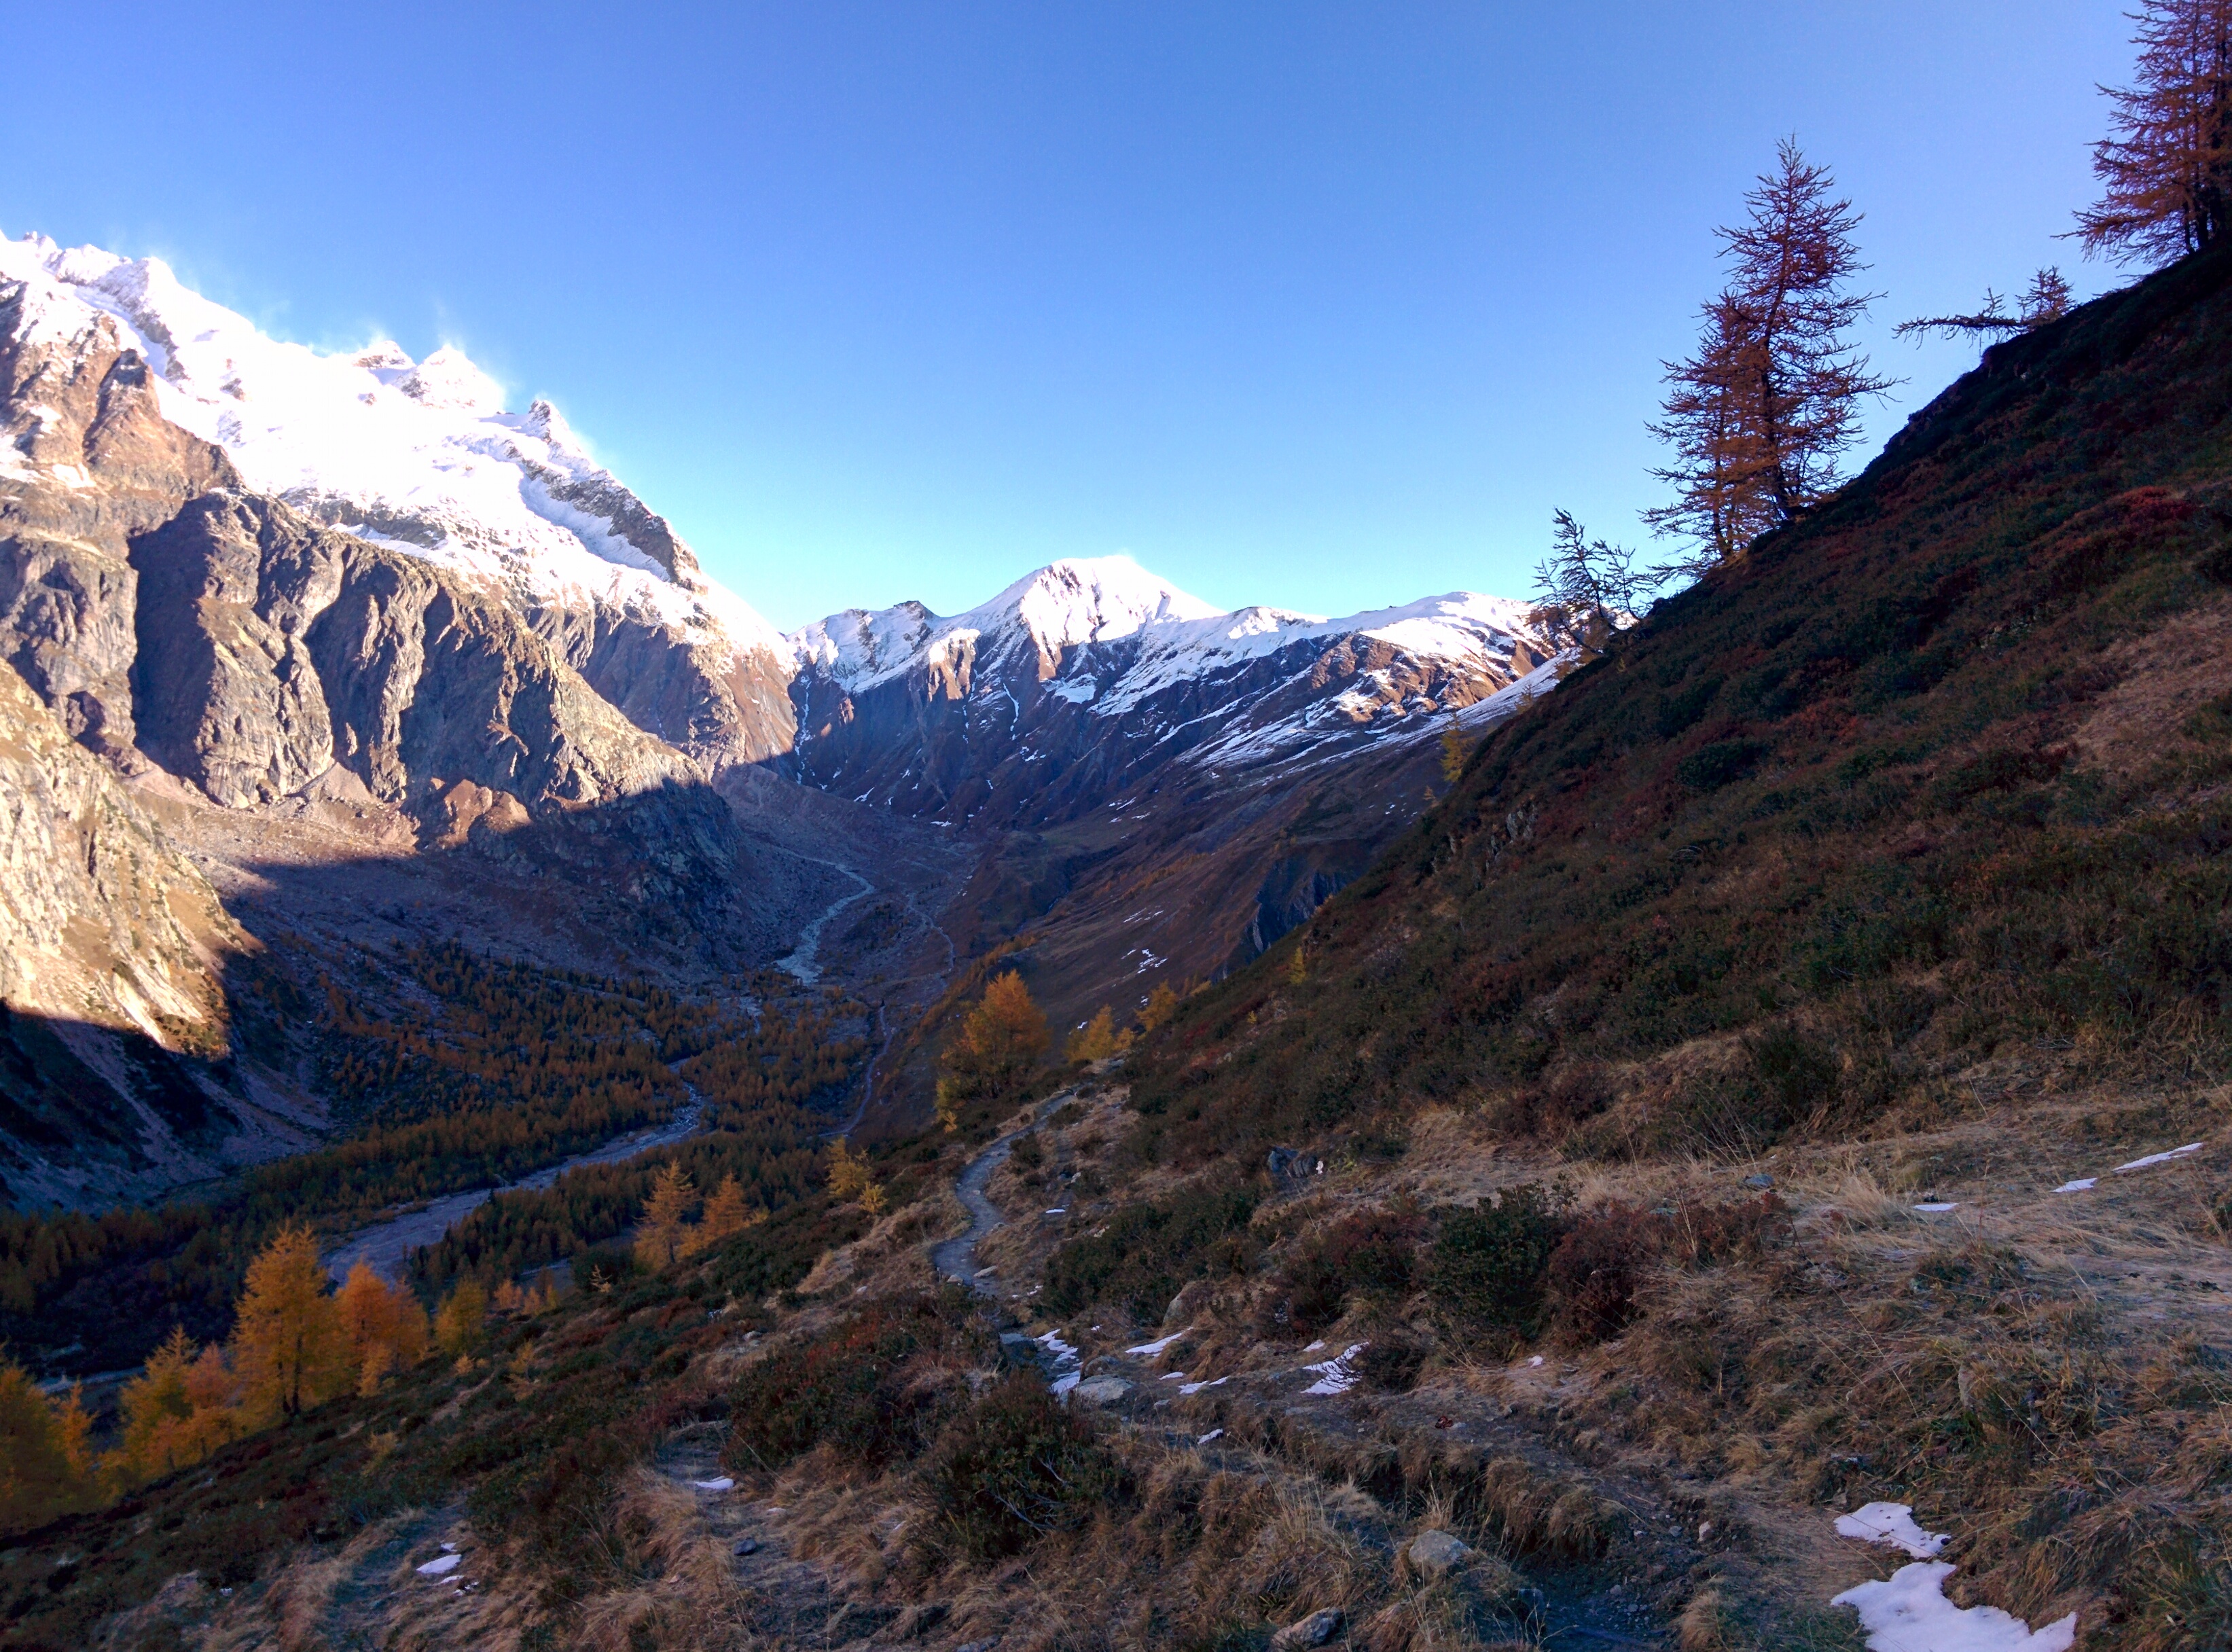 Looking northeast up the Italian side of the Val Ferret, to Switzerland